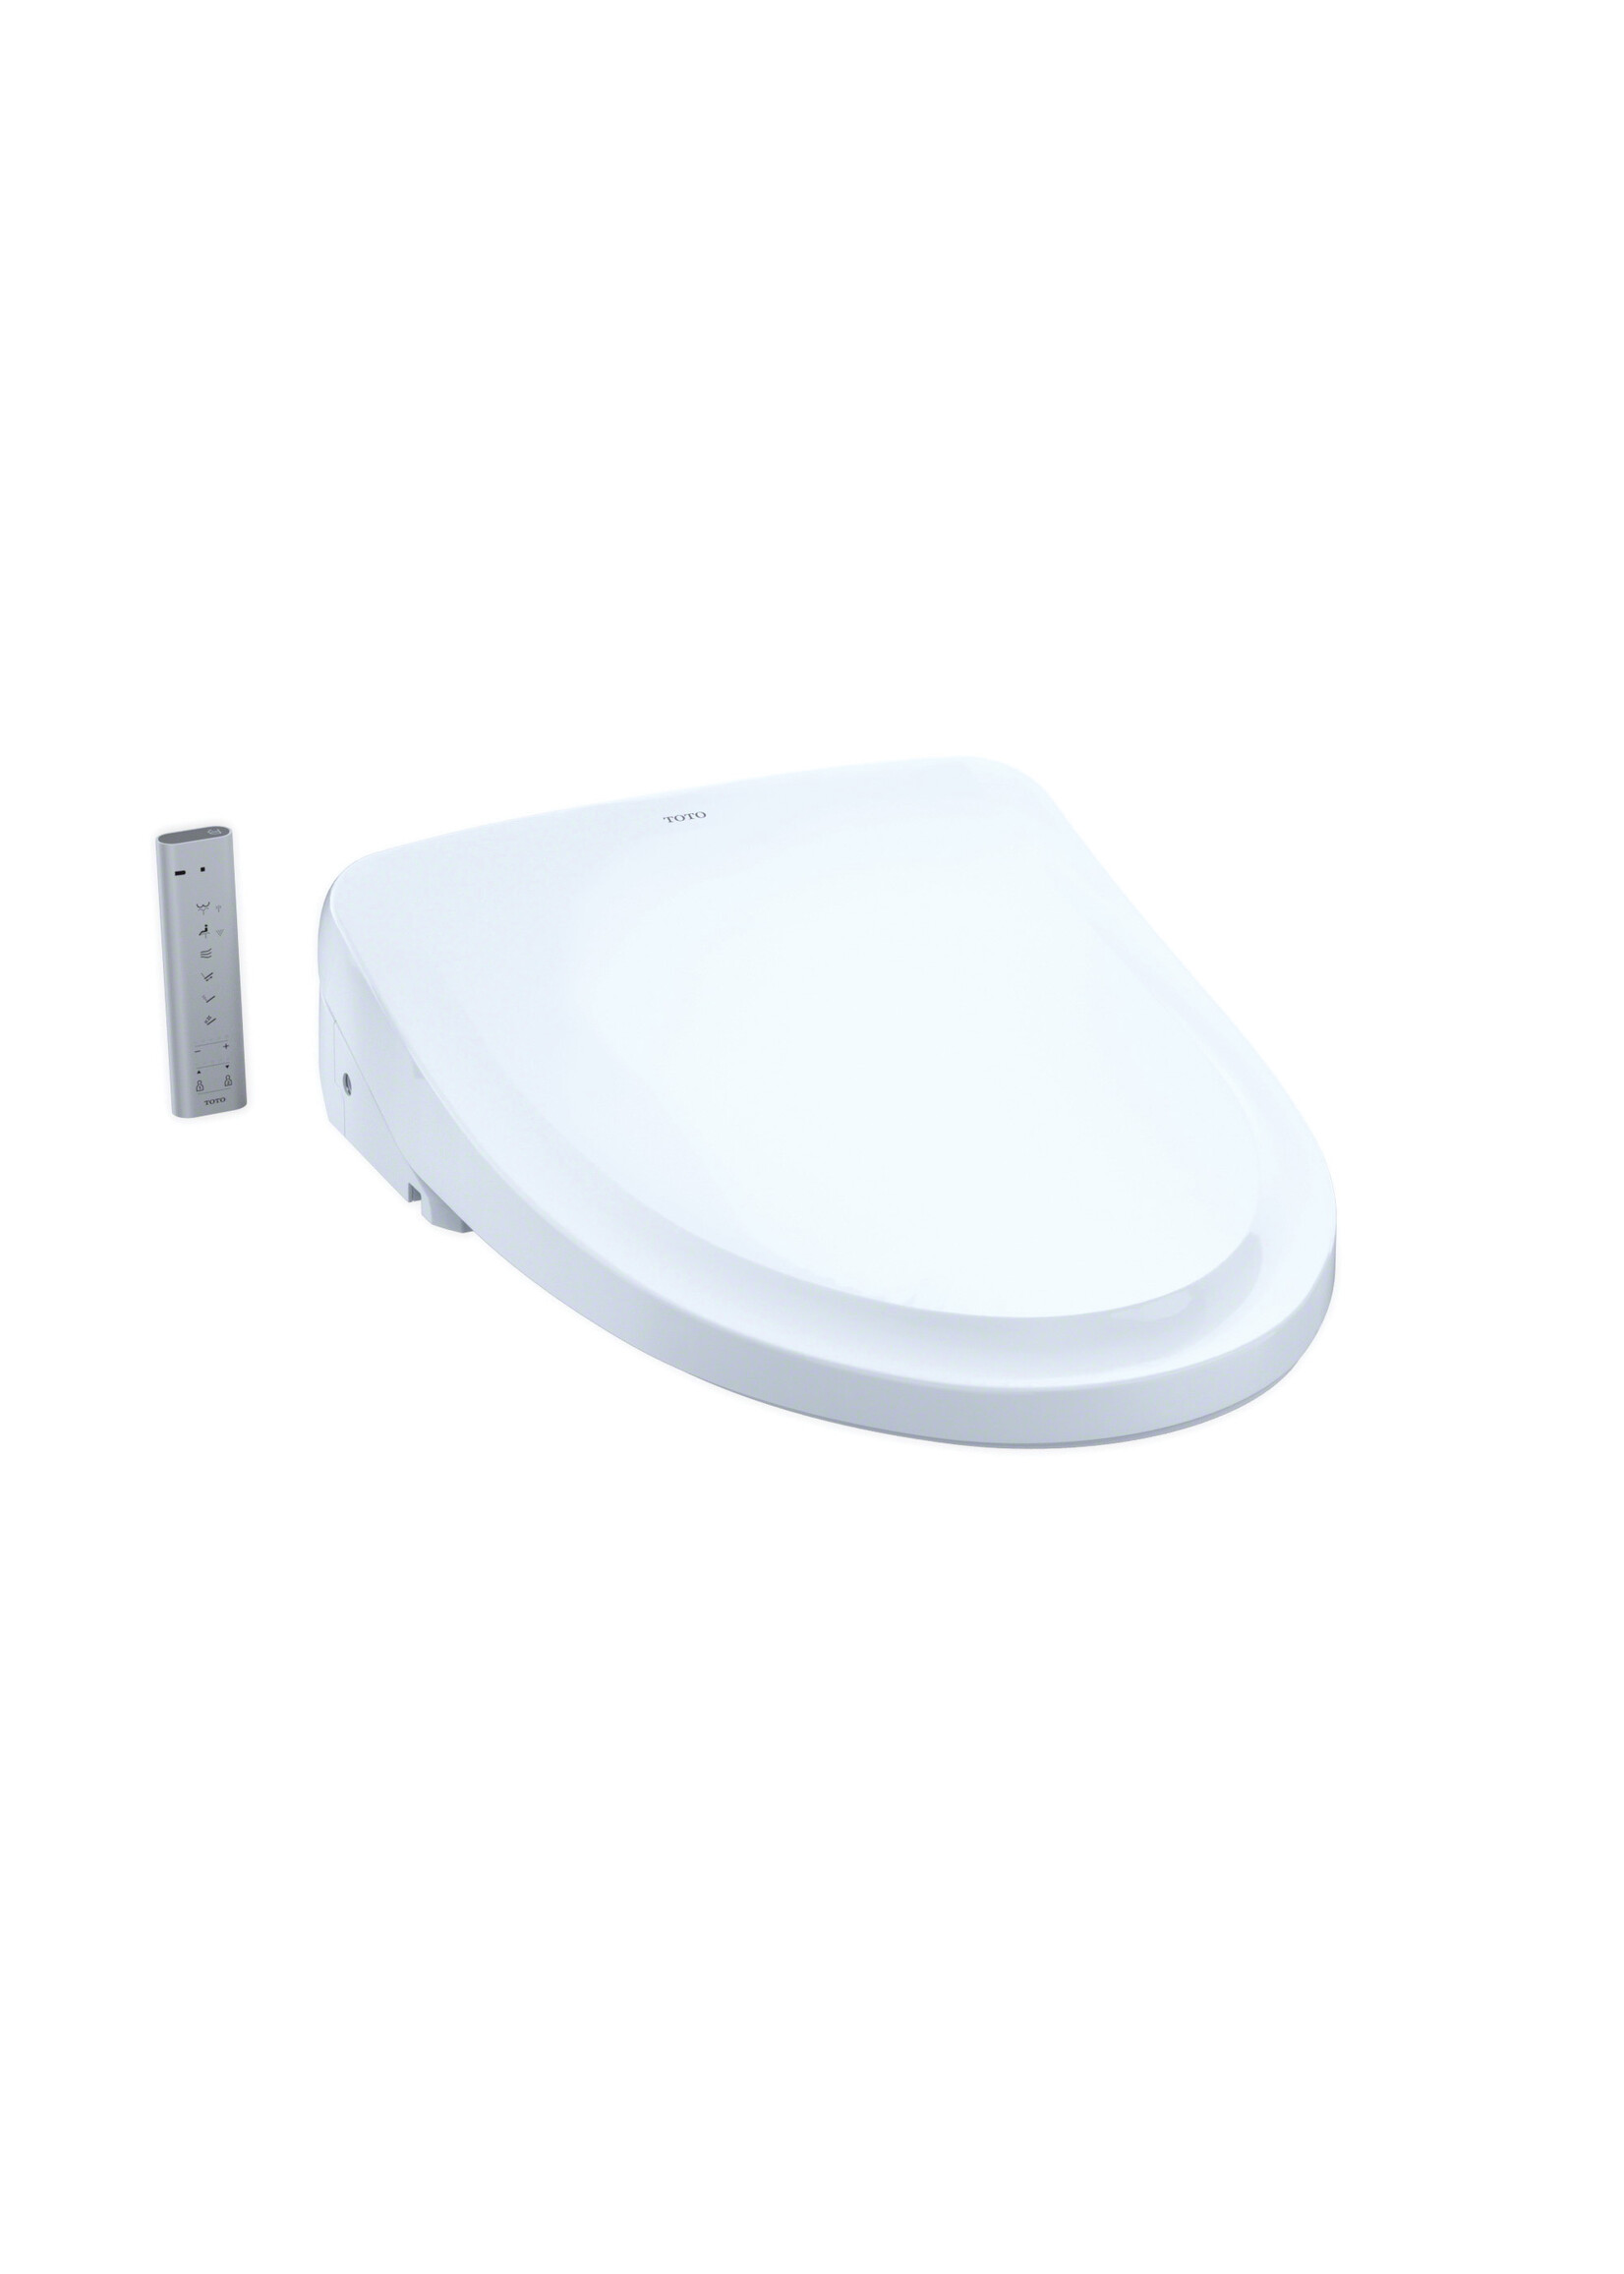 Toto TOTO Washlet S550e - Classic Lid Design - Elongated With Ewater+